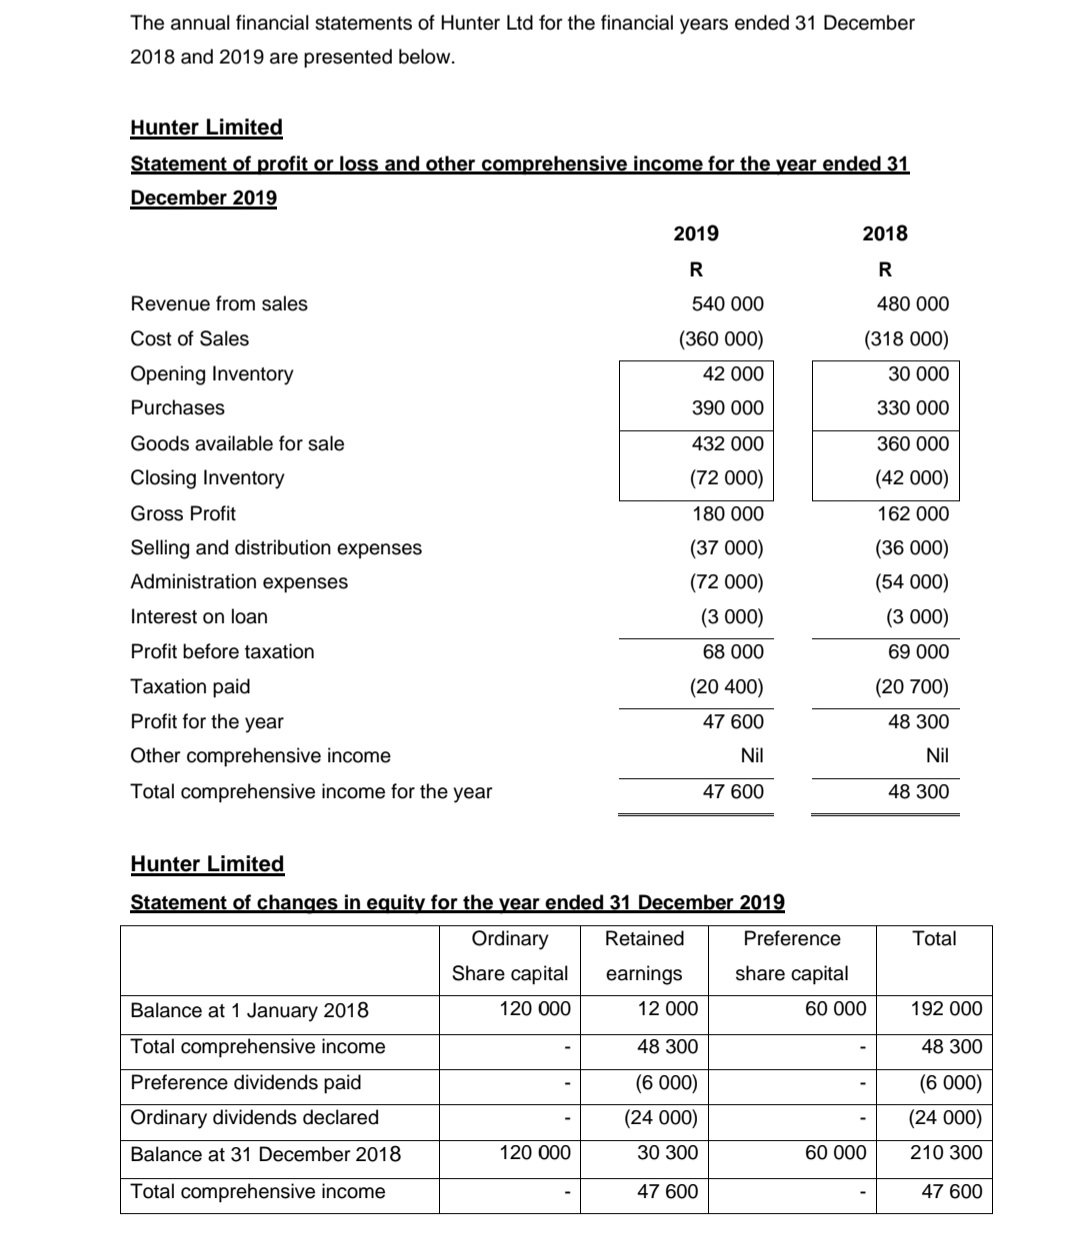 The annual financial statements of Hunter Ltd for the financial years ended 31 December
2018 and 2019 are presented below.
Hunter Limited
Statement of profit or loss and other comprehensive income for the vear ended 31
December 2019
2019
2018
R
R
Revenue from sales
540 000
480 000
Cost of Sales
(360 000)
(318 000)
Opening Inventory
42 000
30 000
Purchases
390 000
330 000
Goods available for sale
432 000
360 000
Closing Inventory
(72 000)
(42 000)
Gross Profit
180 000
162 000
Selling and distribution expenses
(37 000)
(36 000)
Administration expenses
(72 000)
(54 000)
Interest on loan
(3 000)
(3 000)
Profit before taxation
68 000
69 000
Taxation paid
(20 400)
(20 700)
Profit for the year
47 600
48 300
Other comprehensive income
Nil
Nil
Total comprehensive income for the year
47 600
48 300
Hunter Limited
Statement of changes in equity for the year ended 31 December 2019
Ordinary
Retained
Preference
Total
Share capital
earnings
share capital
Balance at 1 January 2018
120 000
12 000
60 000
192 000
Total comprehensive income
48 300
48 300
Preference dividends paid
(6 000)
(6 000)
Ordinary dividends declared
(24 000)
(24 000)
Balance at 31 December 2018
120 000
30 300
60 000
210 300
Total comprehensive income
47 600
47 600
